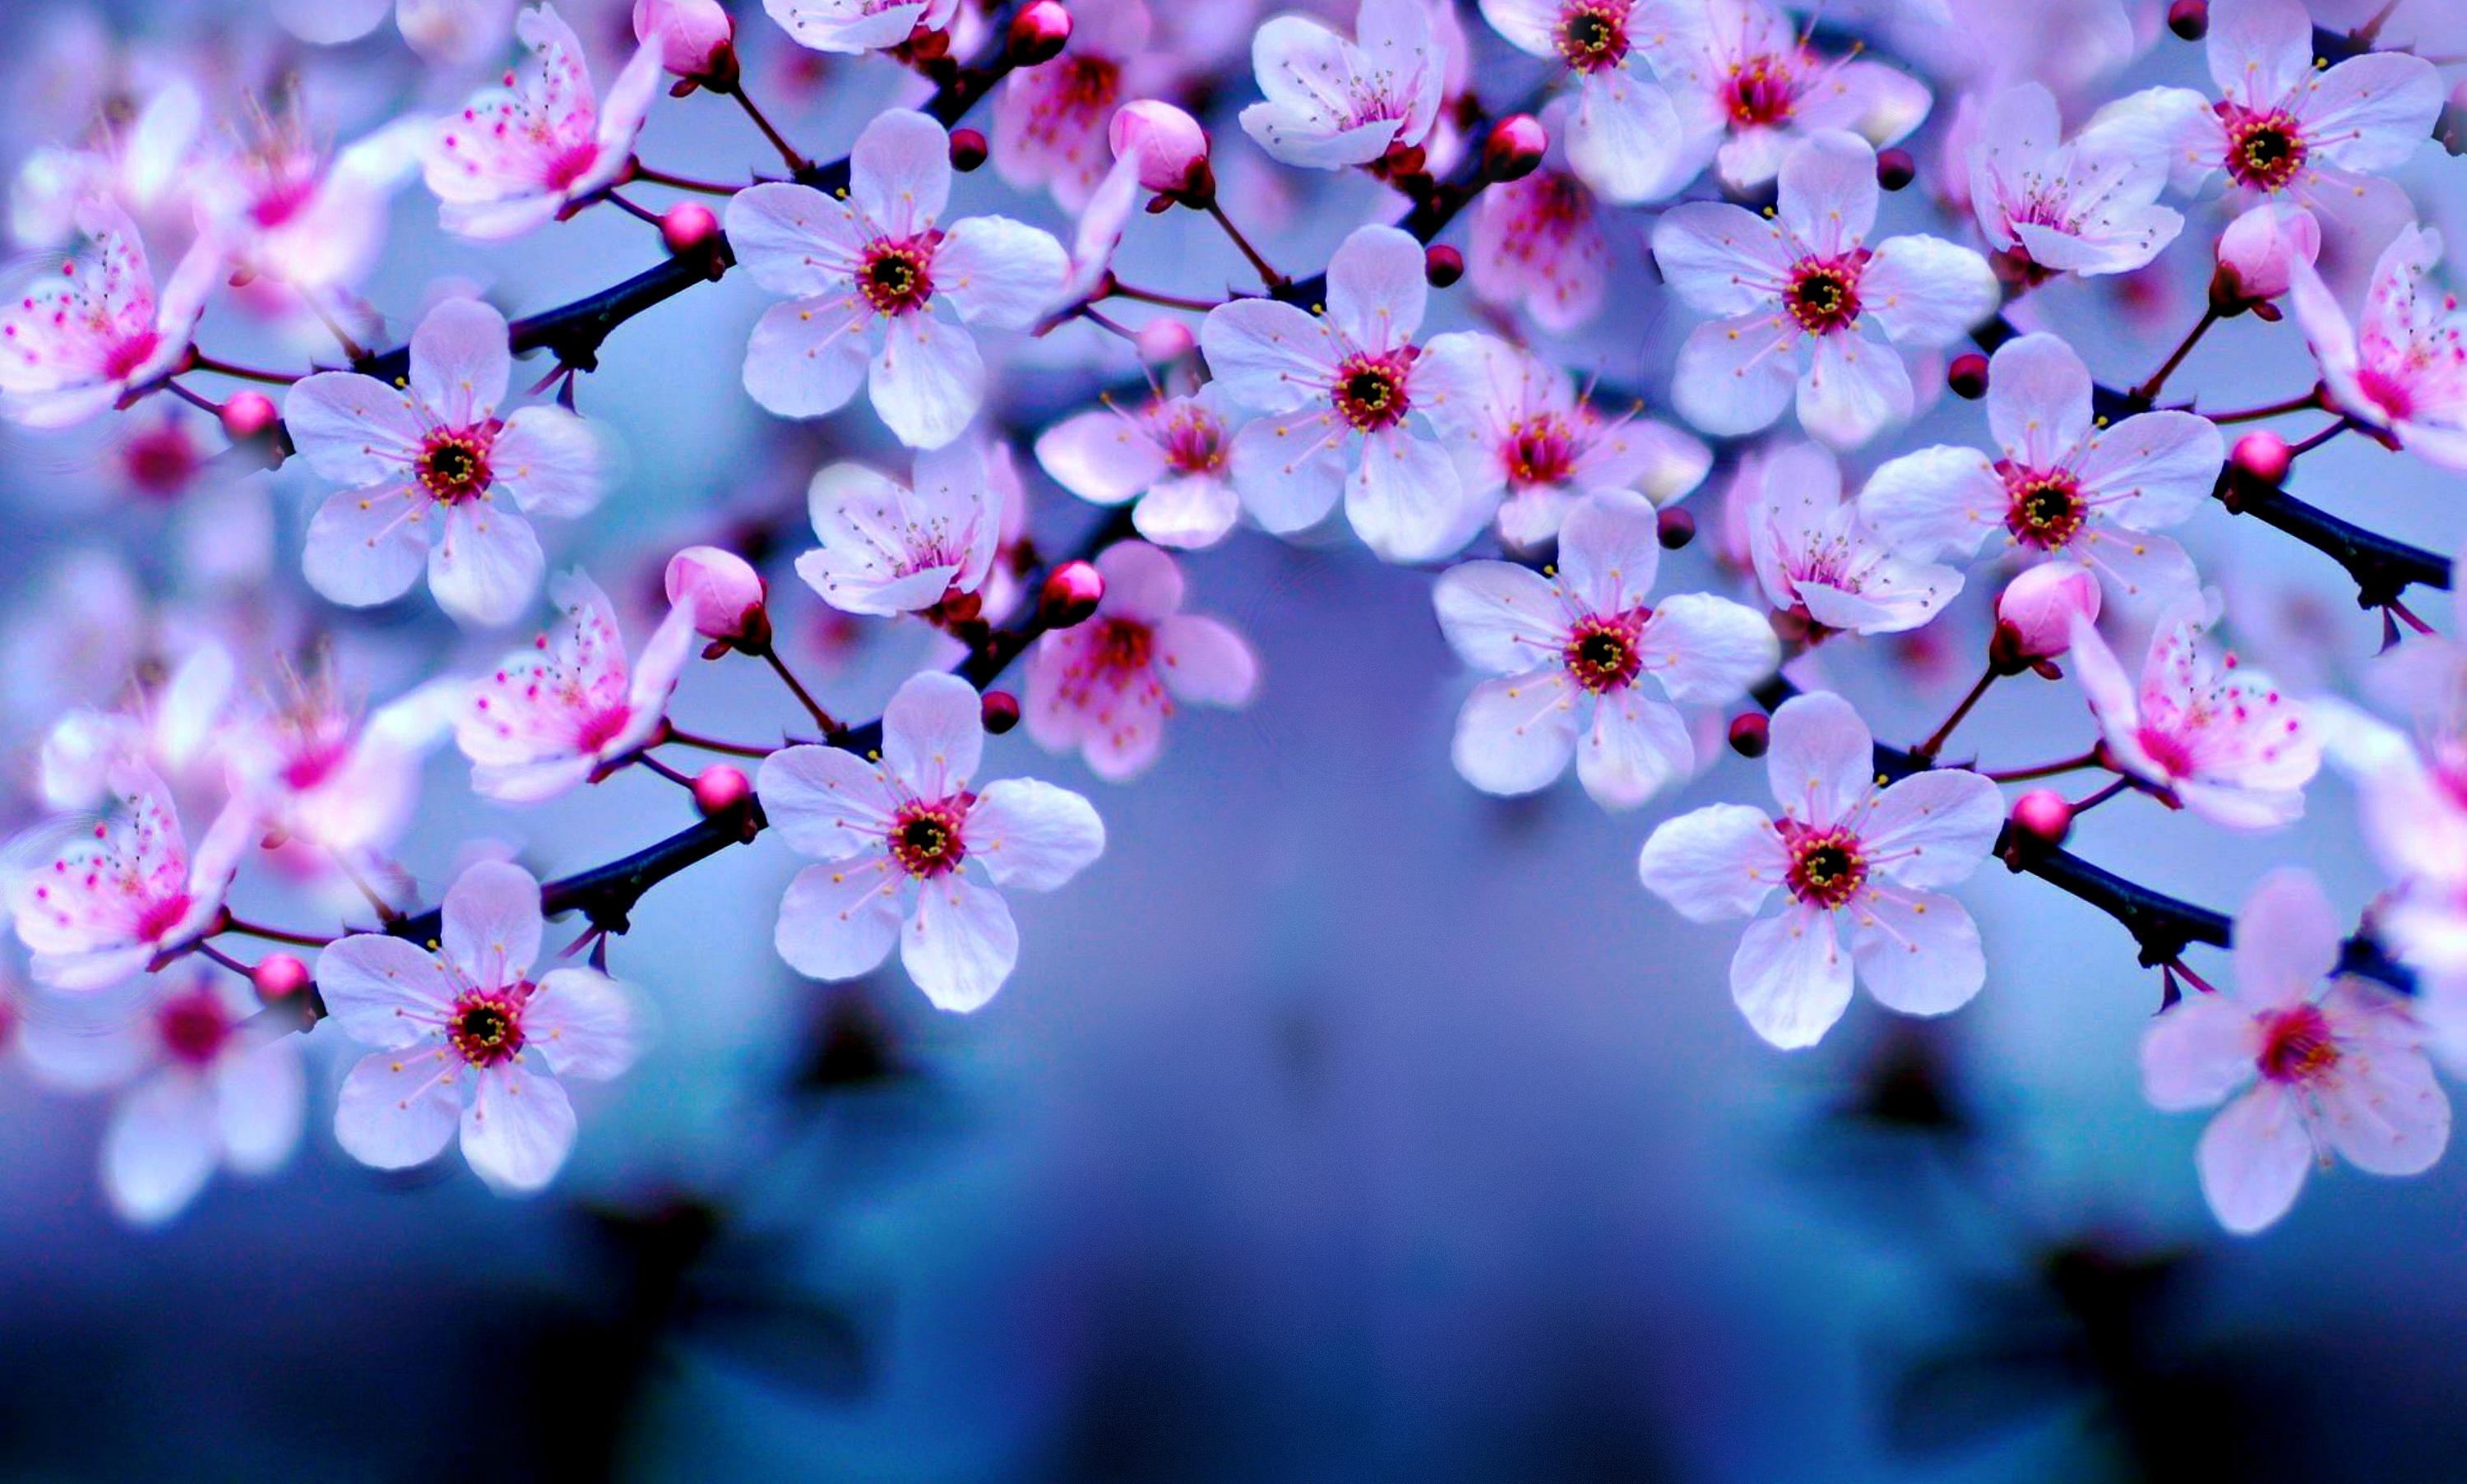 Cherry Blossom 4k, HD Flowers, 4k Wallpapers, Images, Backgrounds